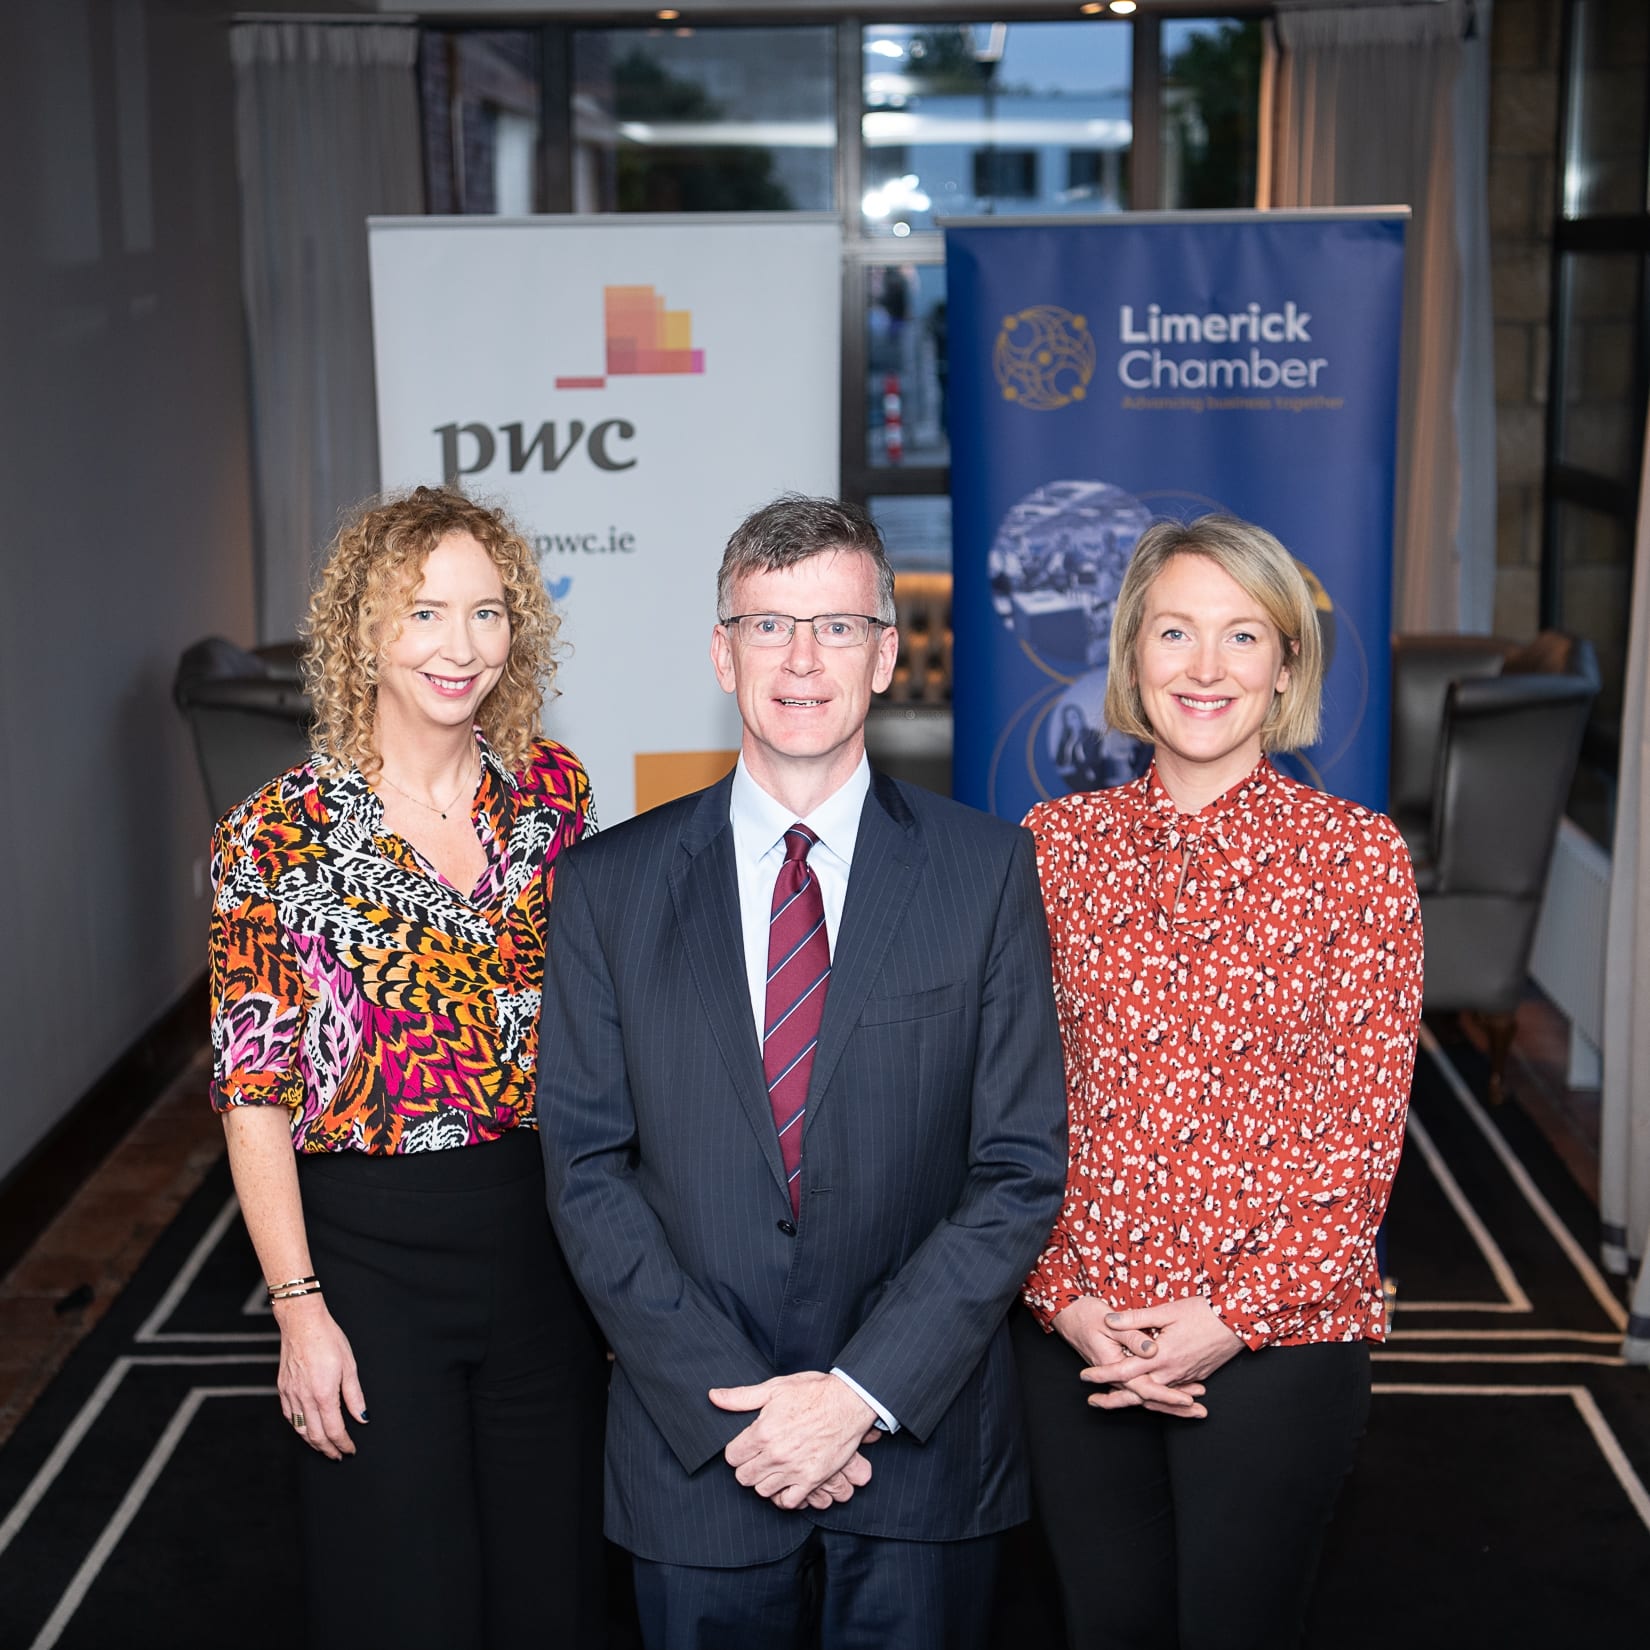 PWC Budget Breakfast in association with the Limerick Chamber which took place in the Castletroy Park Hotel on 9th October 2019, from left to right: Mairead Connolly - PWC / Speaker, Professor Alan Ahearne - Speaker, Emer Hodges - PWC / SPEAKER, 
Photo by Morning Star Photography